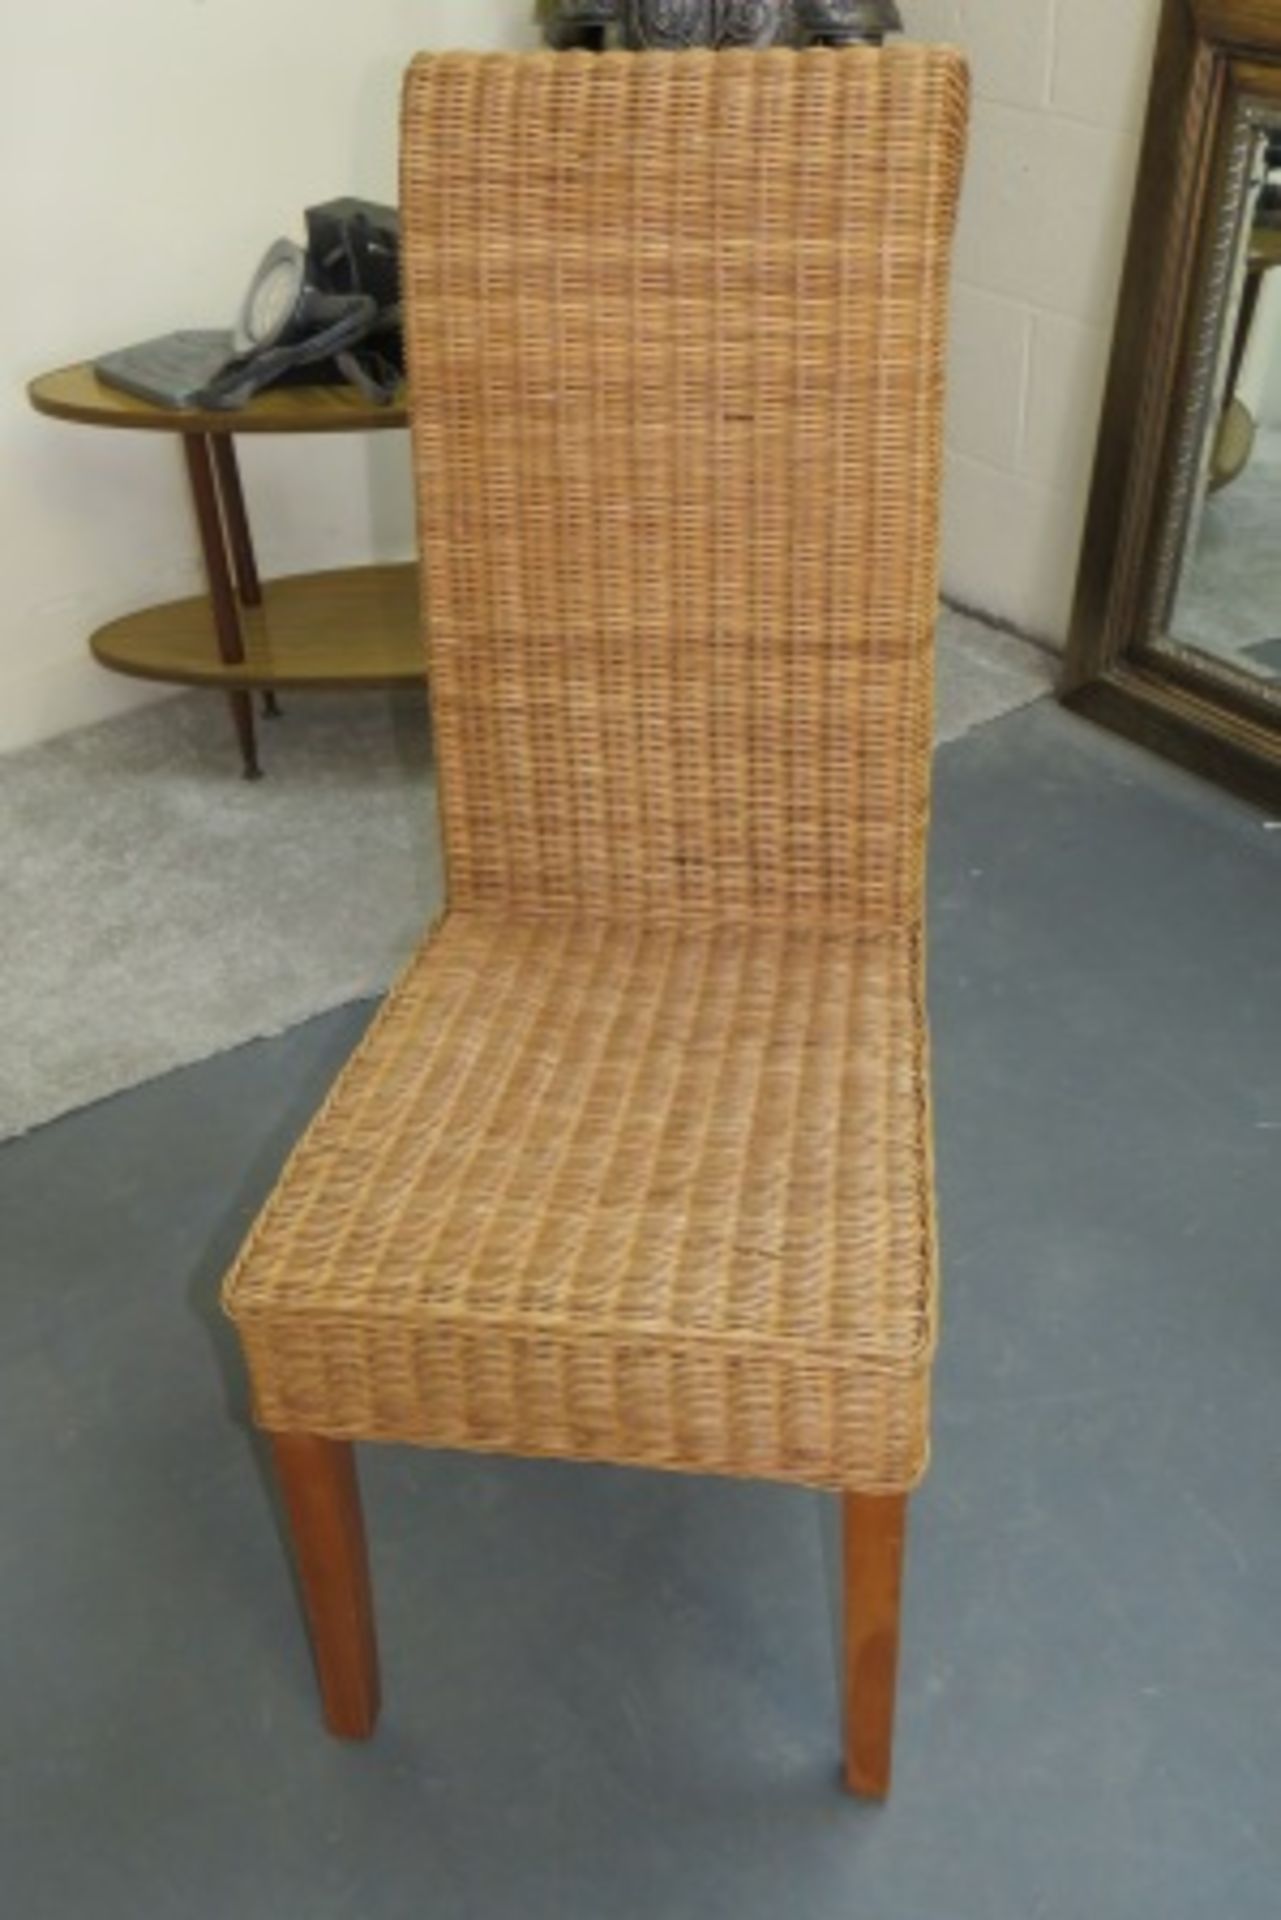 High Back Rattan Dining Chair - No Reserve - Image 2 of 2